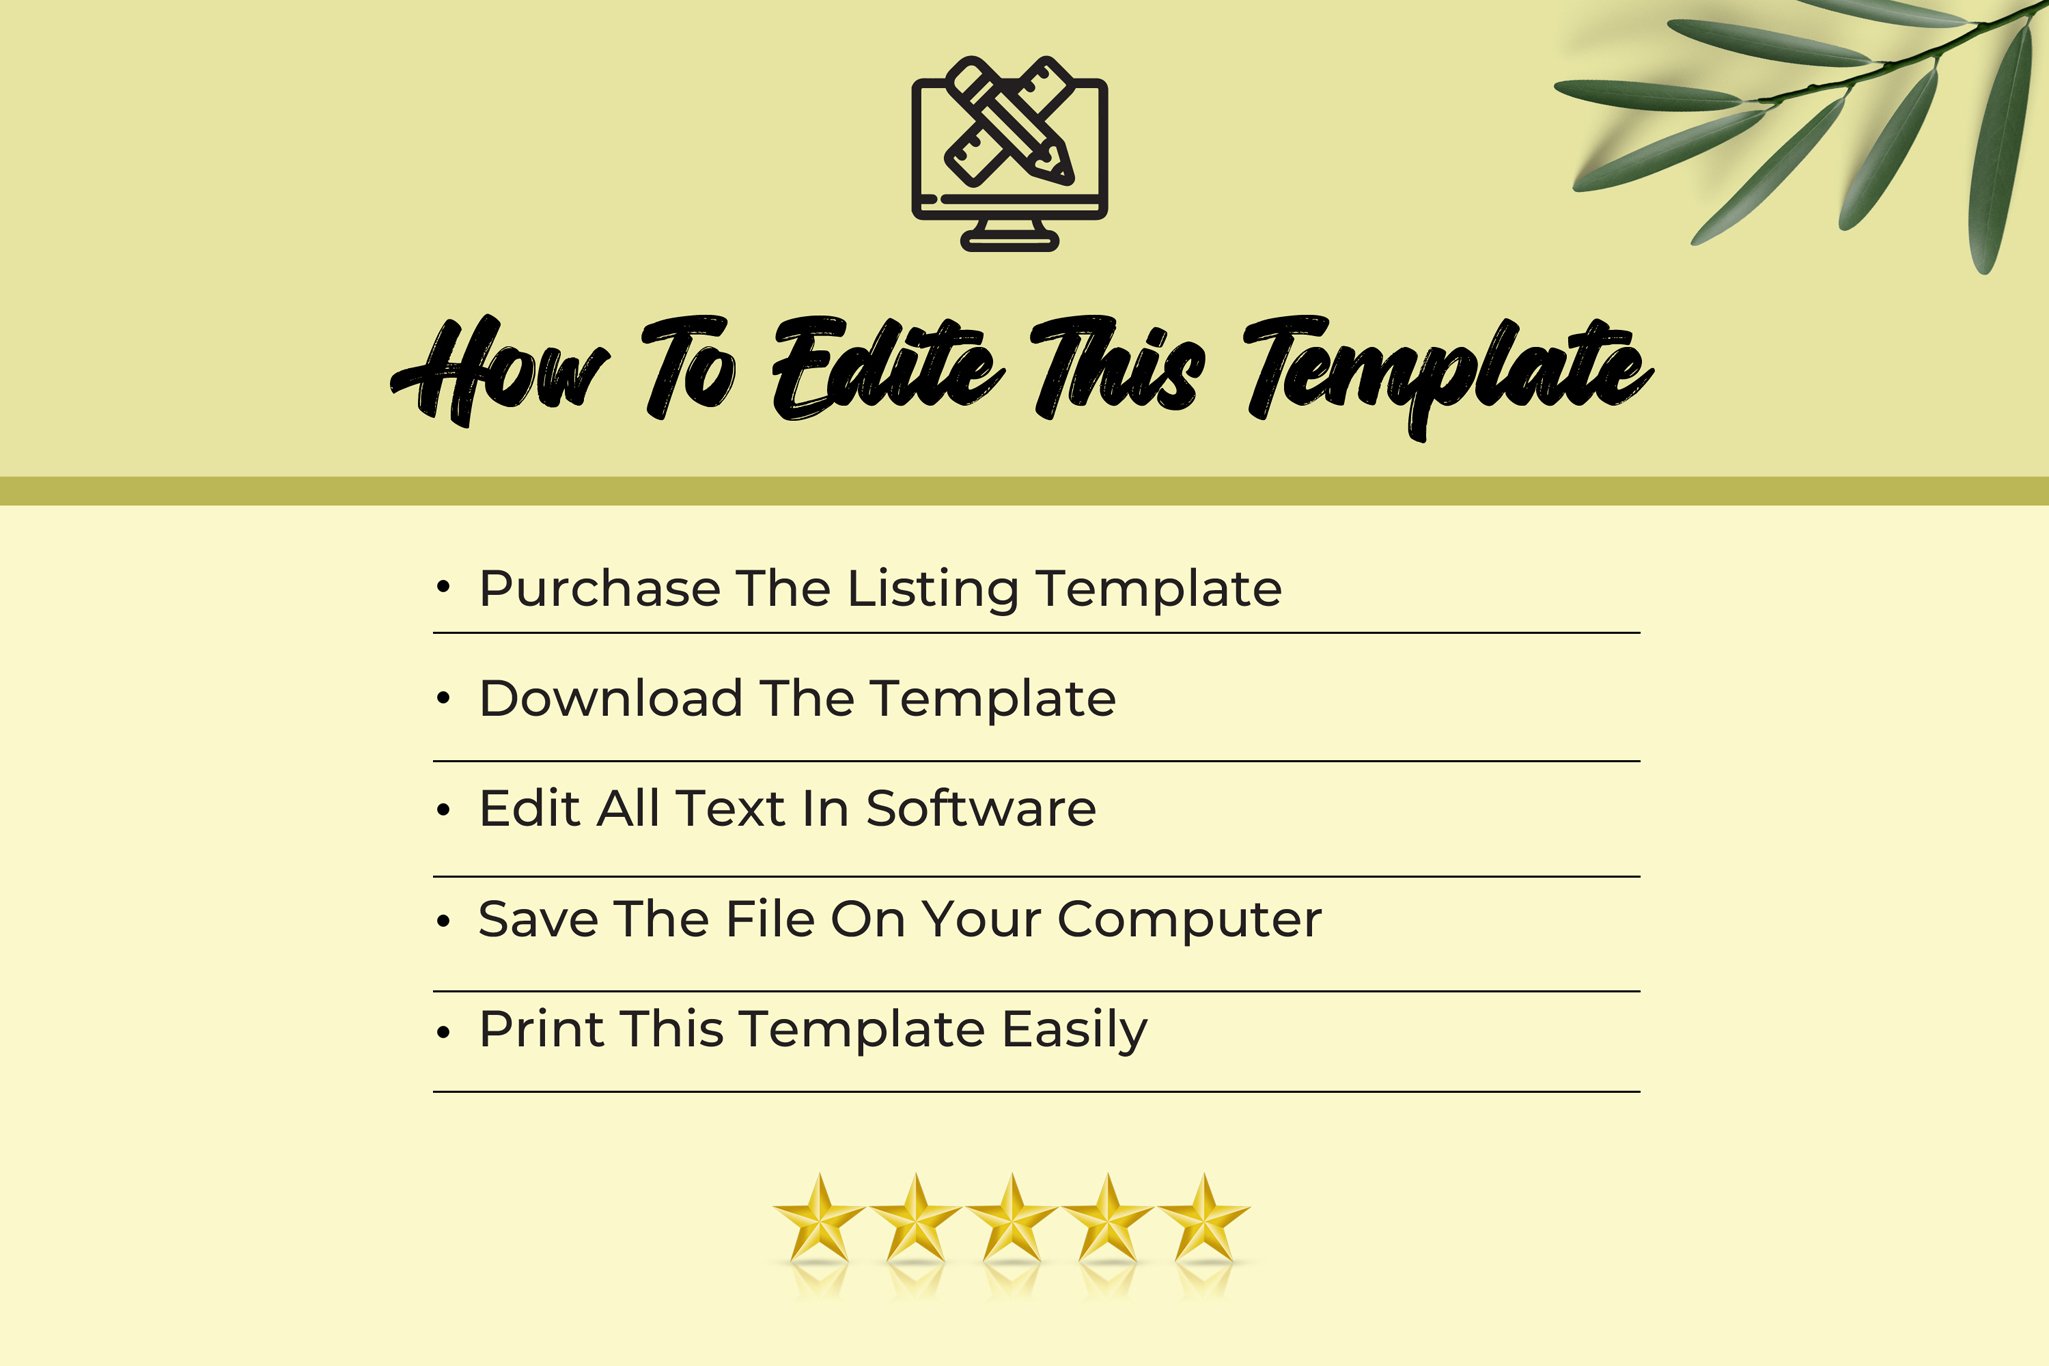 06 how to edite this template 634